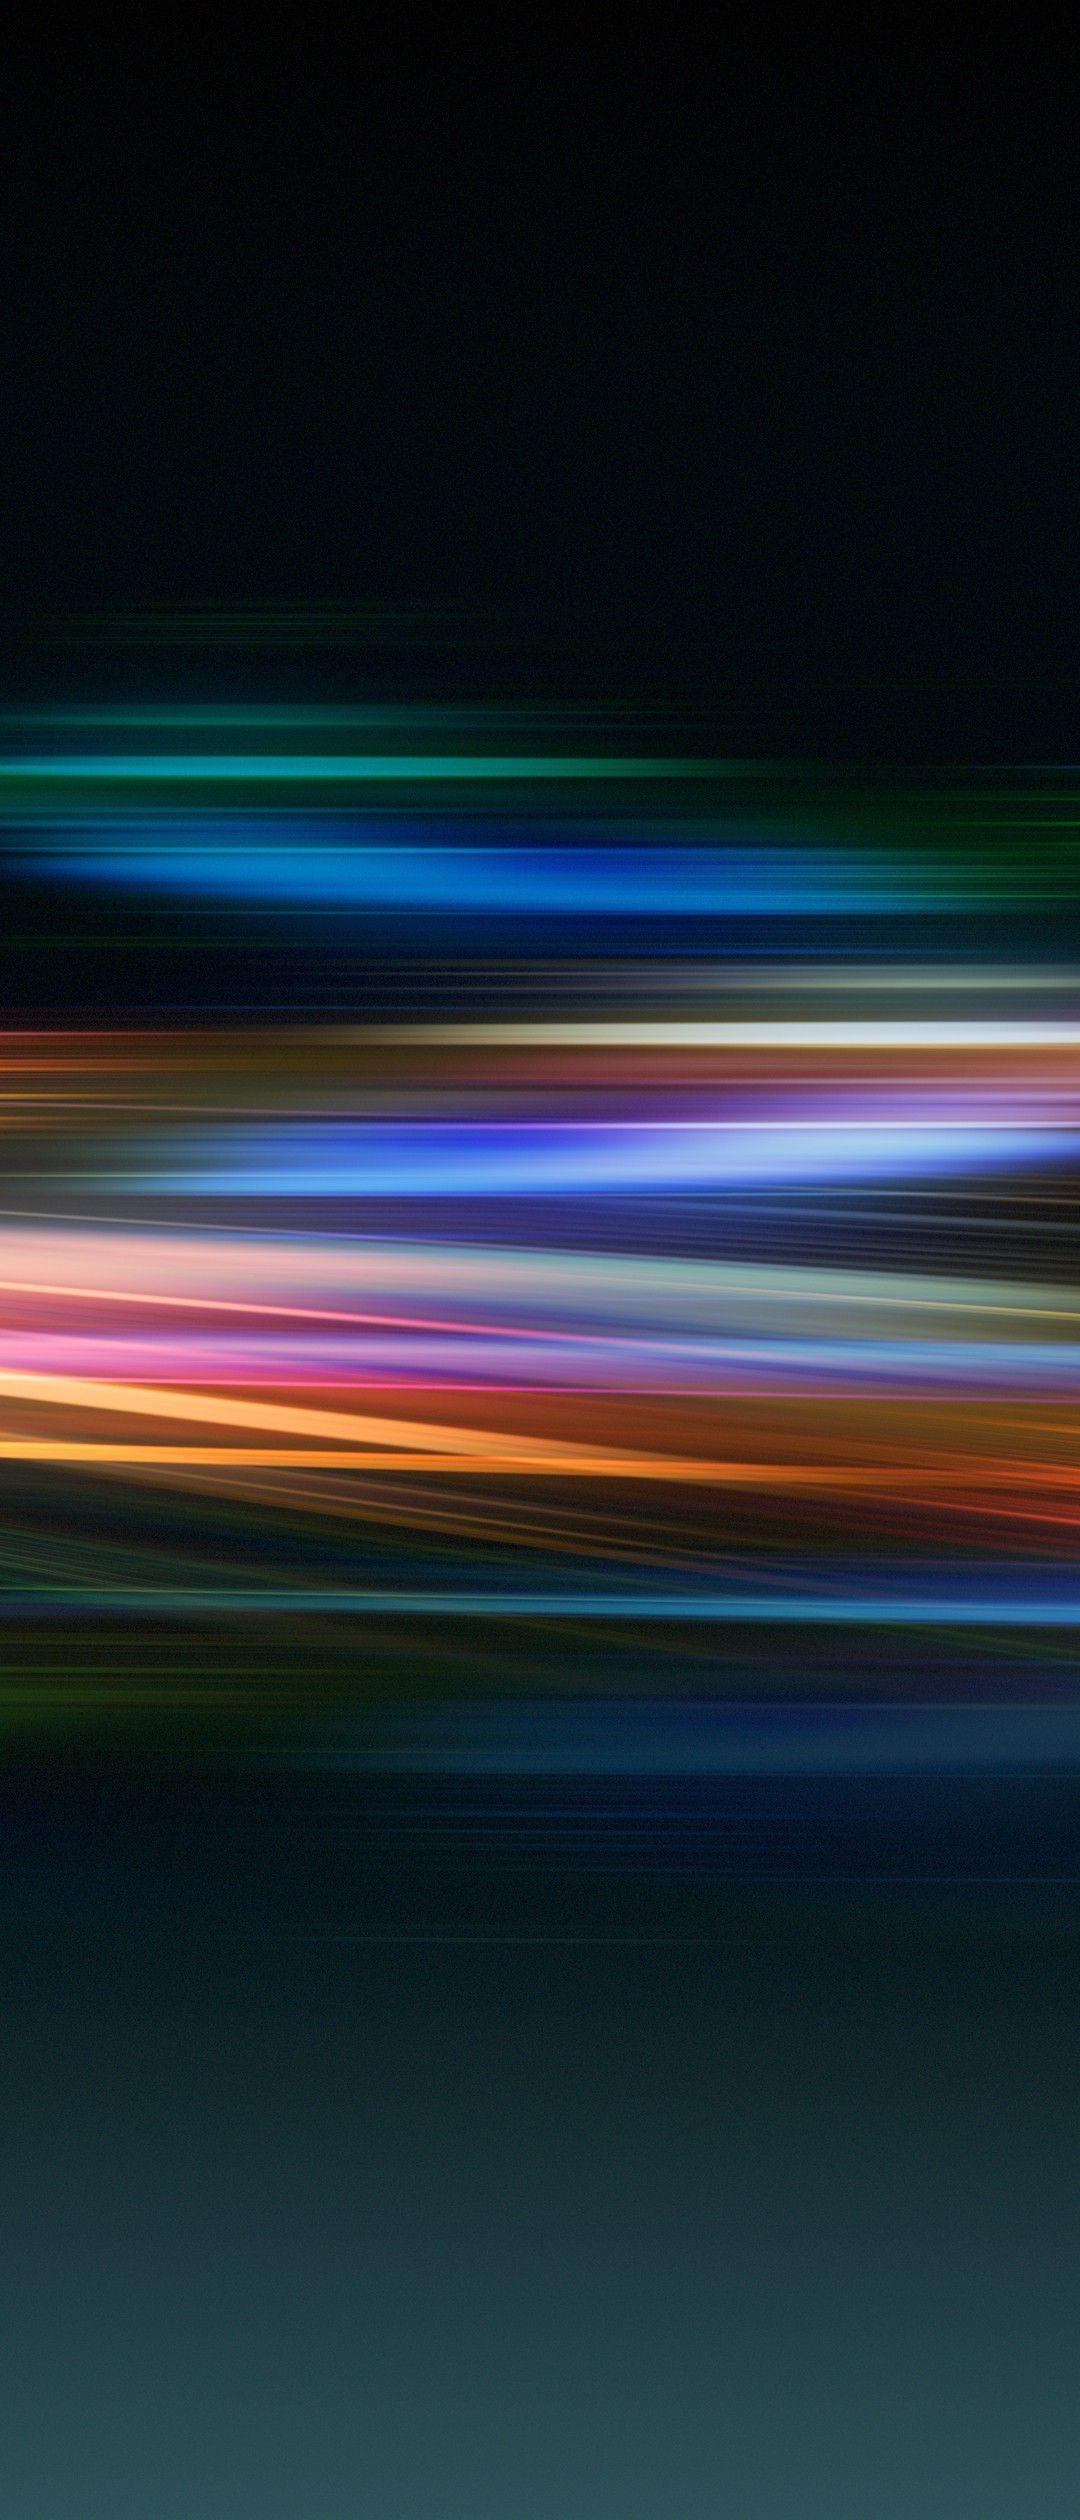 Xperia 1 Wallpapers Top Free Xperia 1 Backgrounds Wallpaperaccess